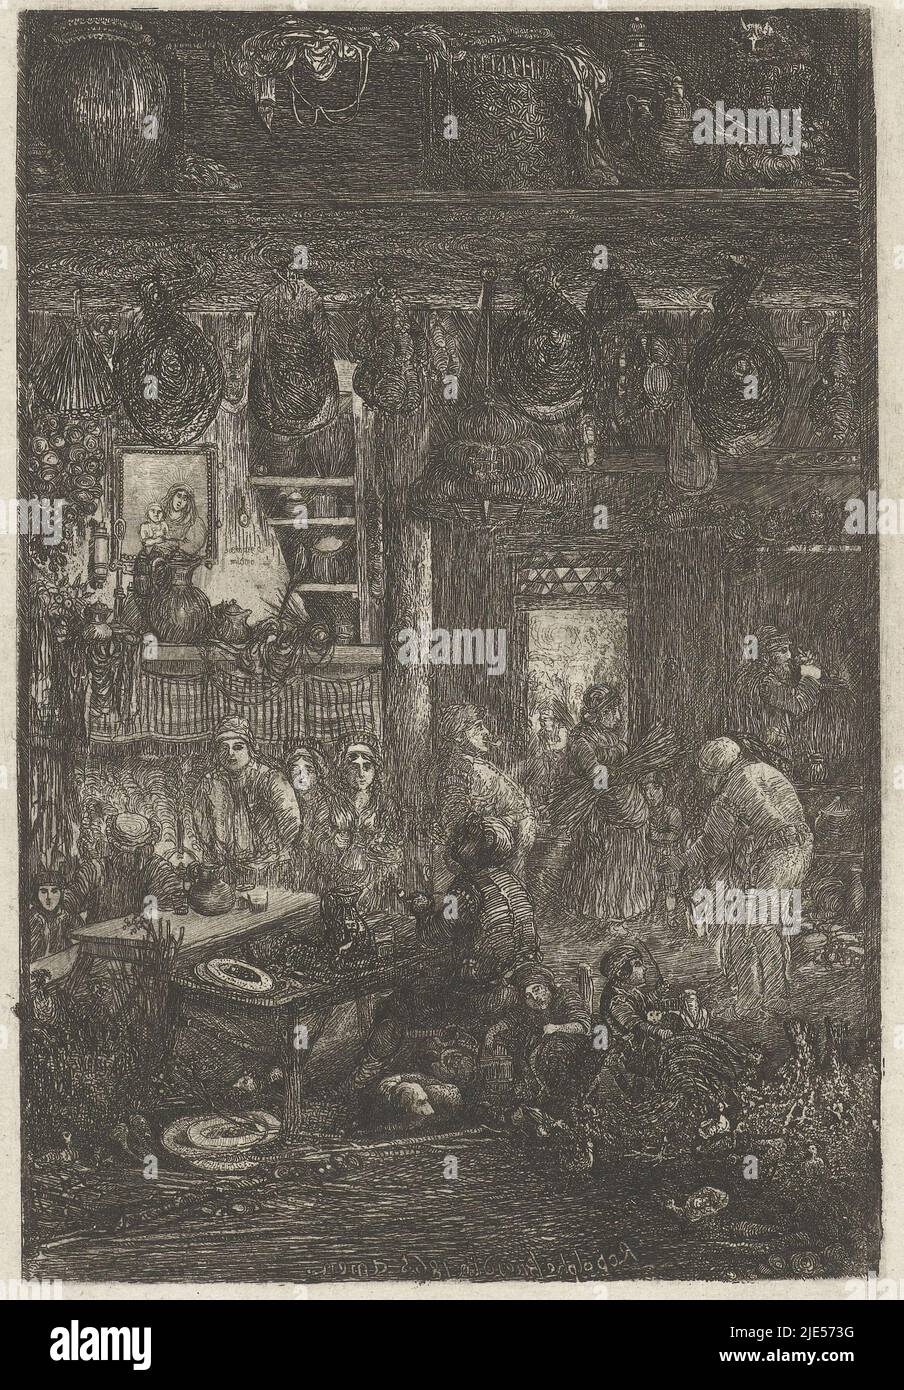 Interior with large farming family. On the left farmers are sitting at a table eating and drinking, in the foreground on the right children are playing. Behind on the right, a woman walks into the room with wood for the fireplace. Hams hanging from the beams, Interior with peasant family Interior, print maker: Rodolphe Bresdin, (mentioned on object), Rodolphe Bresdin, 1859 and/or 1865, paper, etching, h 198 mm, w 128 mm, h 297 mm × w 211 mm Stock Photo